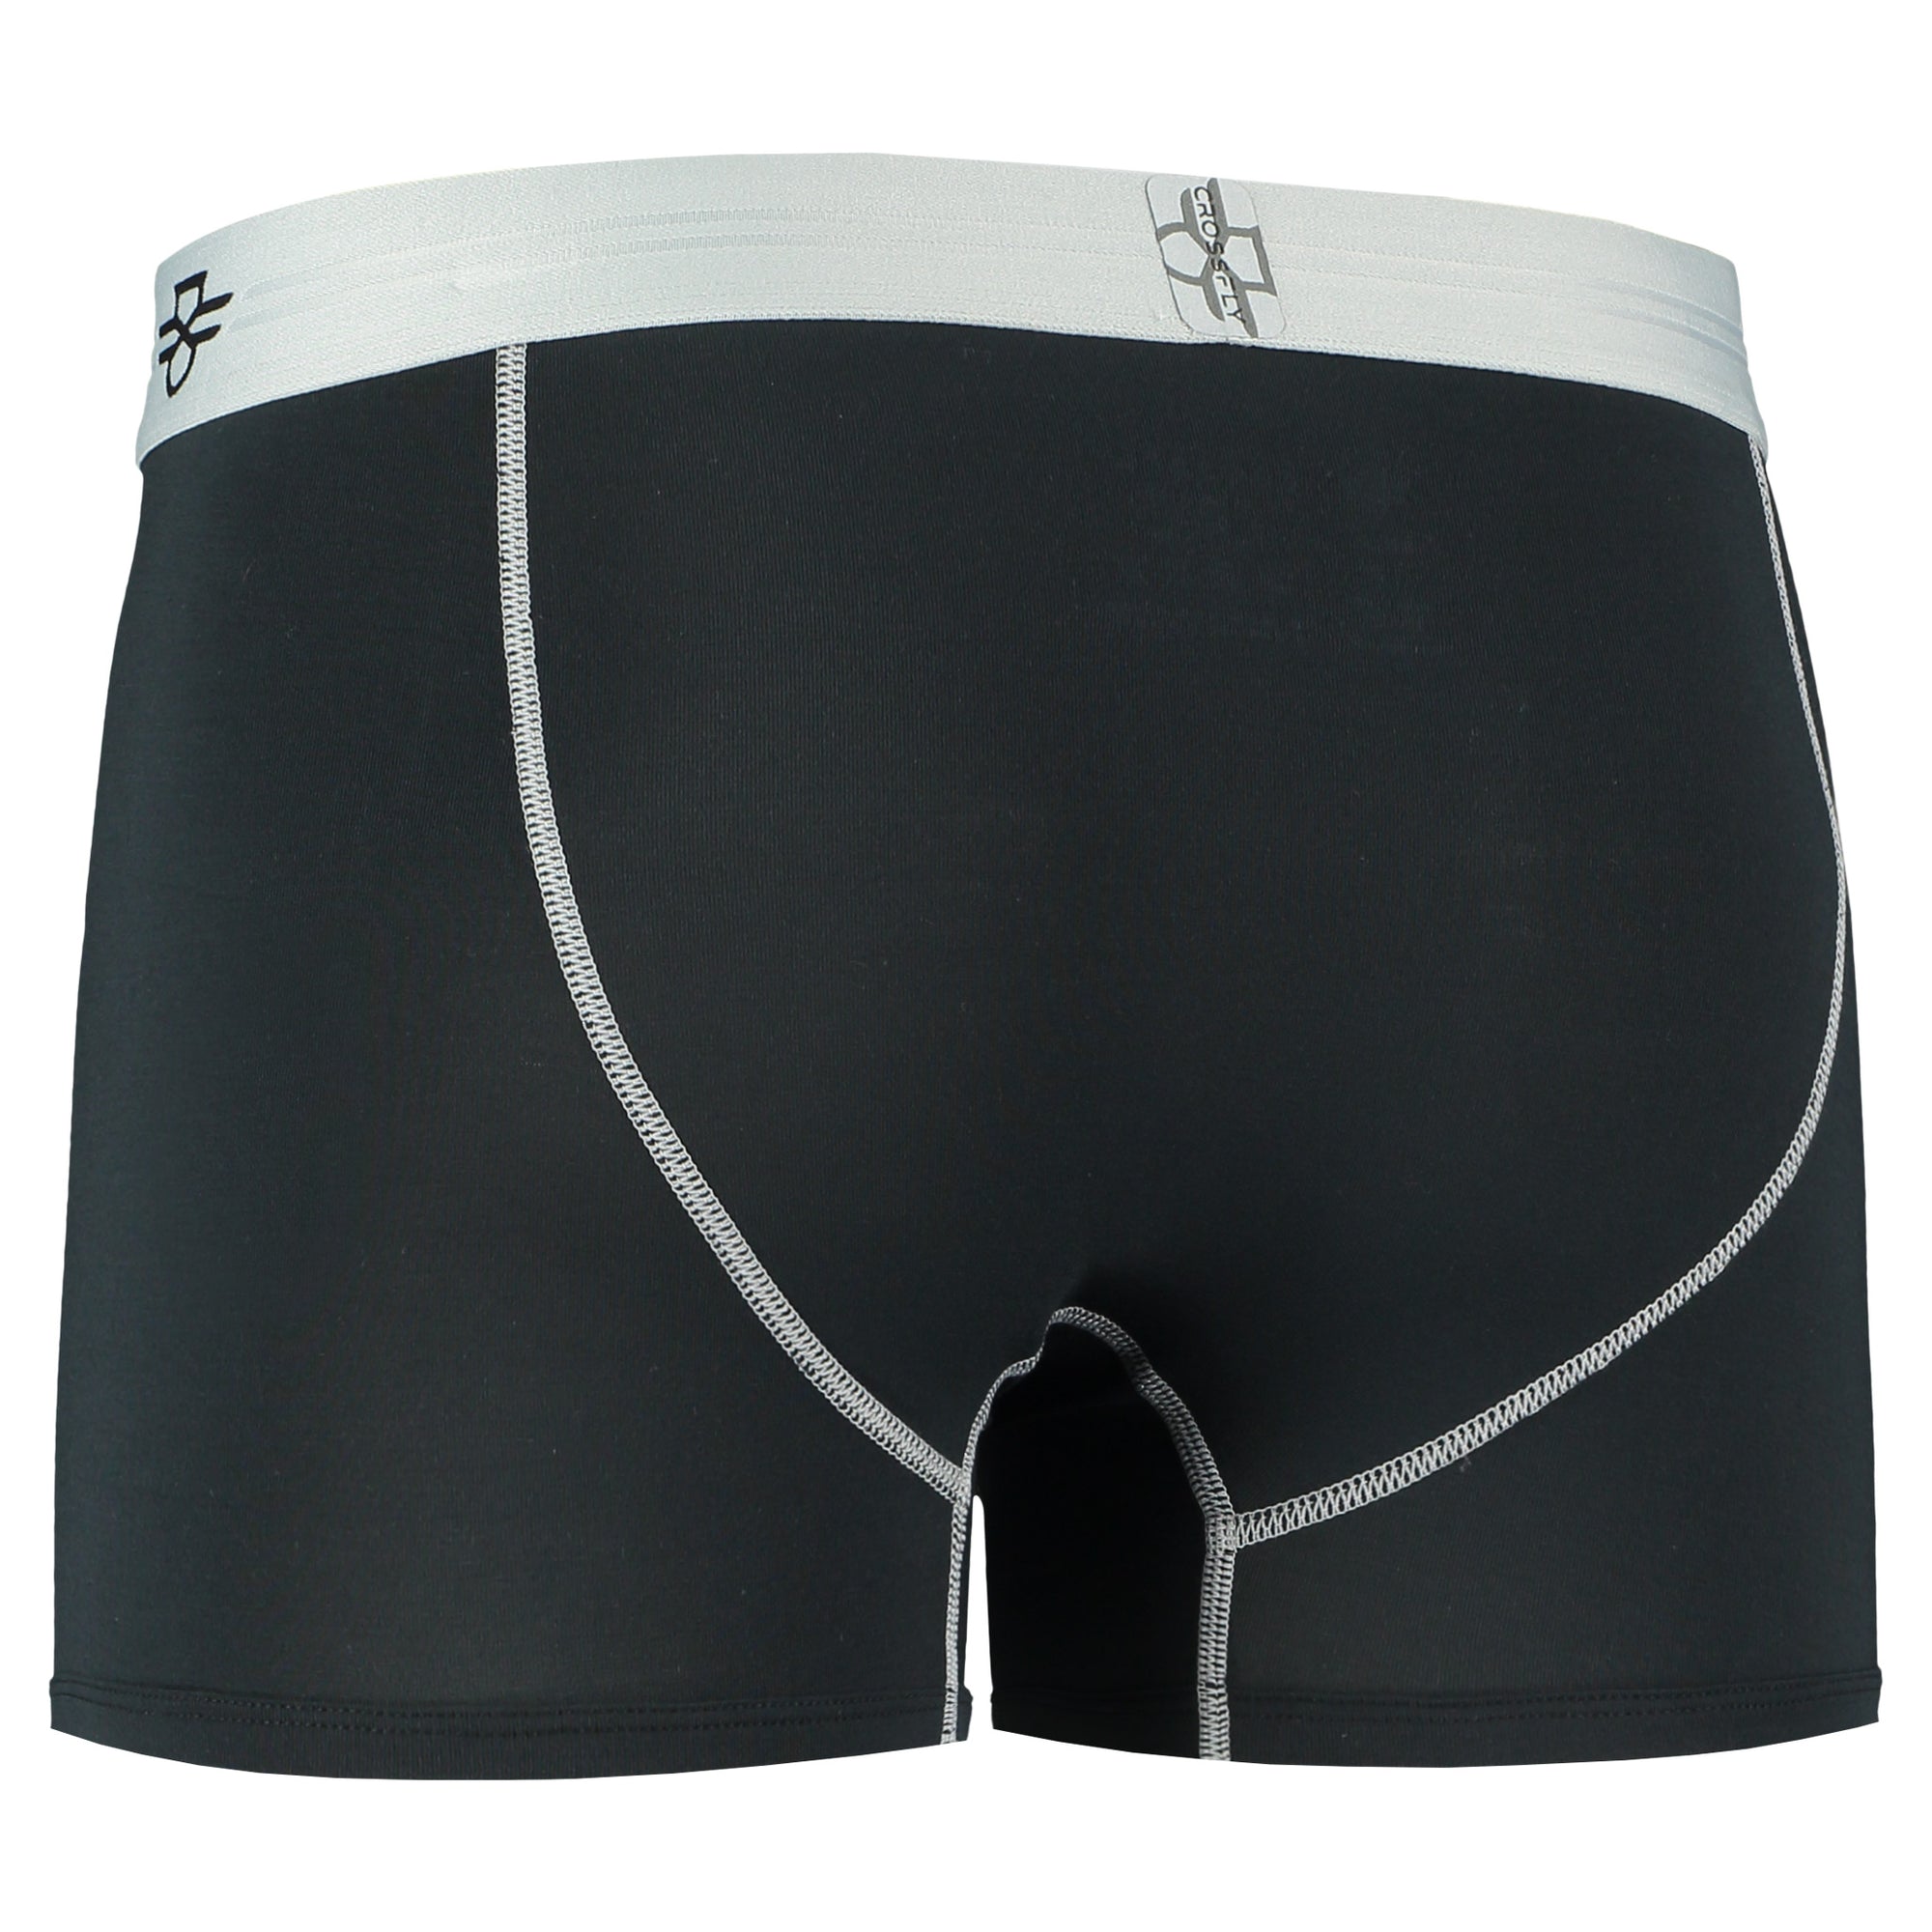 Crossfly men's IKON X 3" black / silver trunks from the Everyday series, featuring X-Fly and Coccoon internal pocket support.